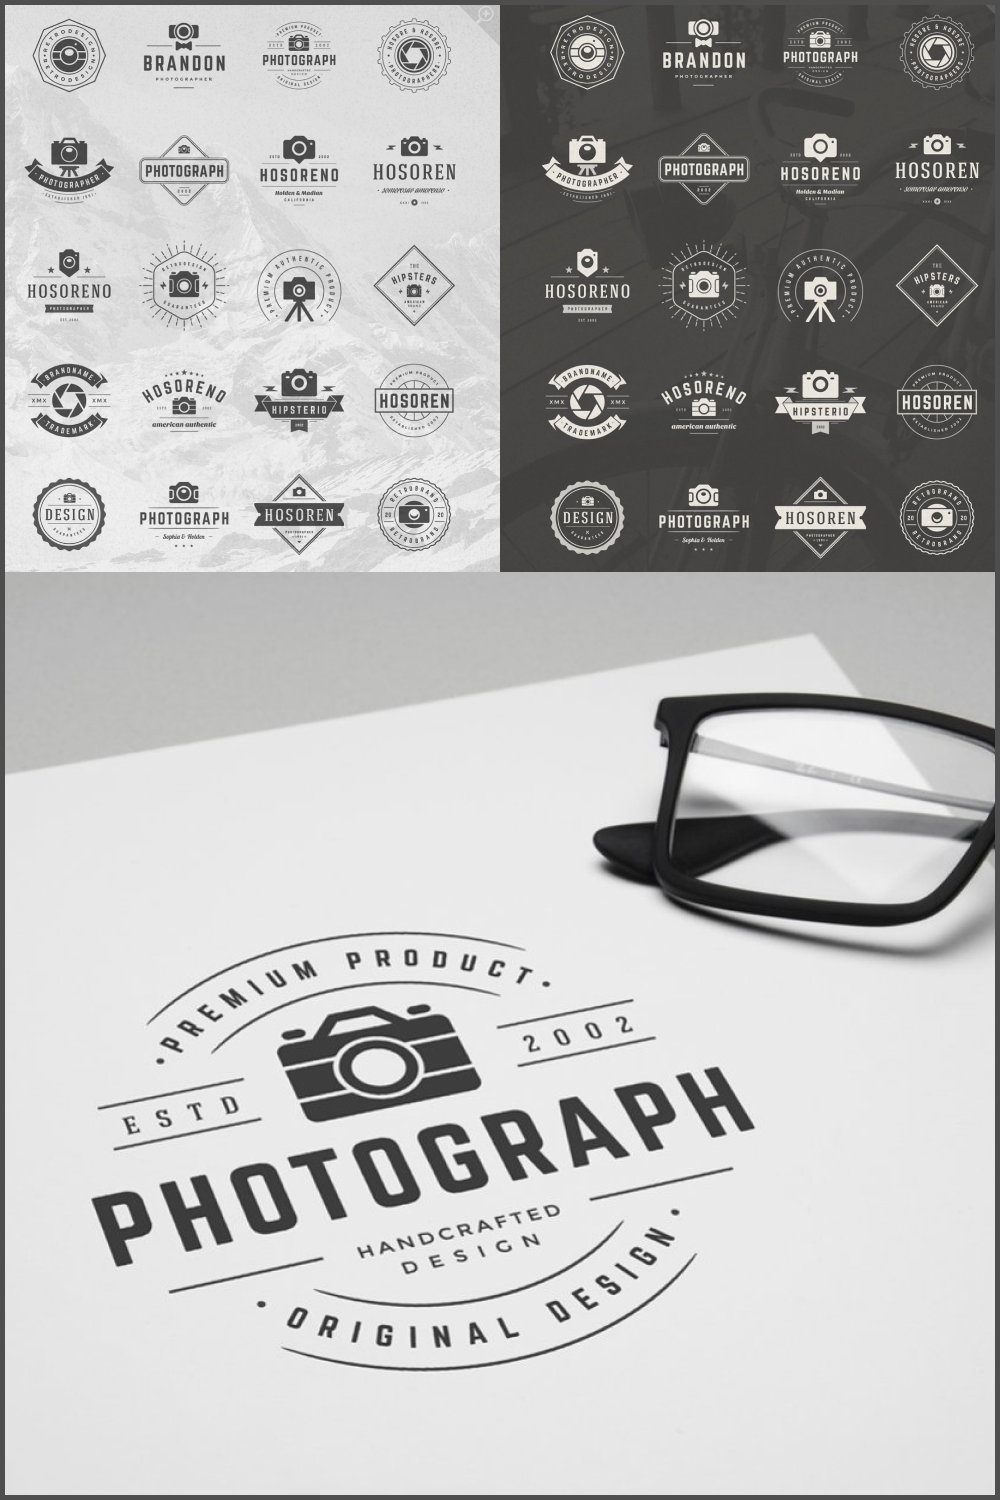 Photography logos and badges of pinterest.